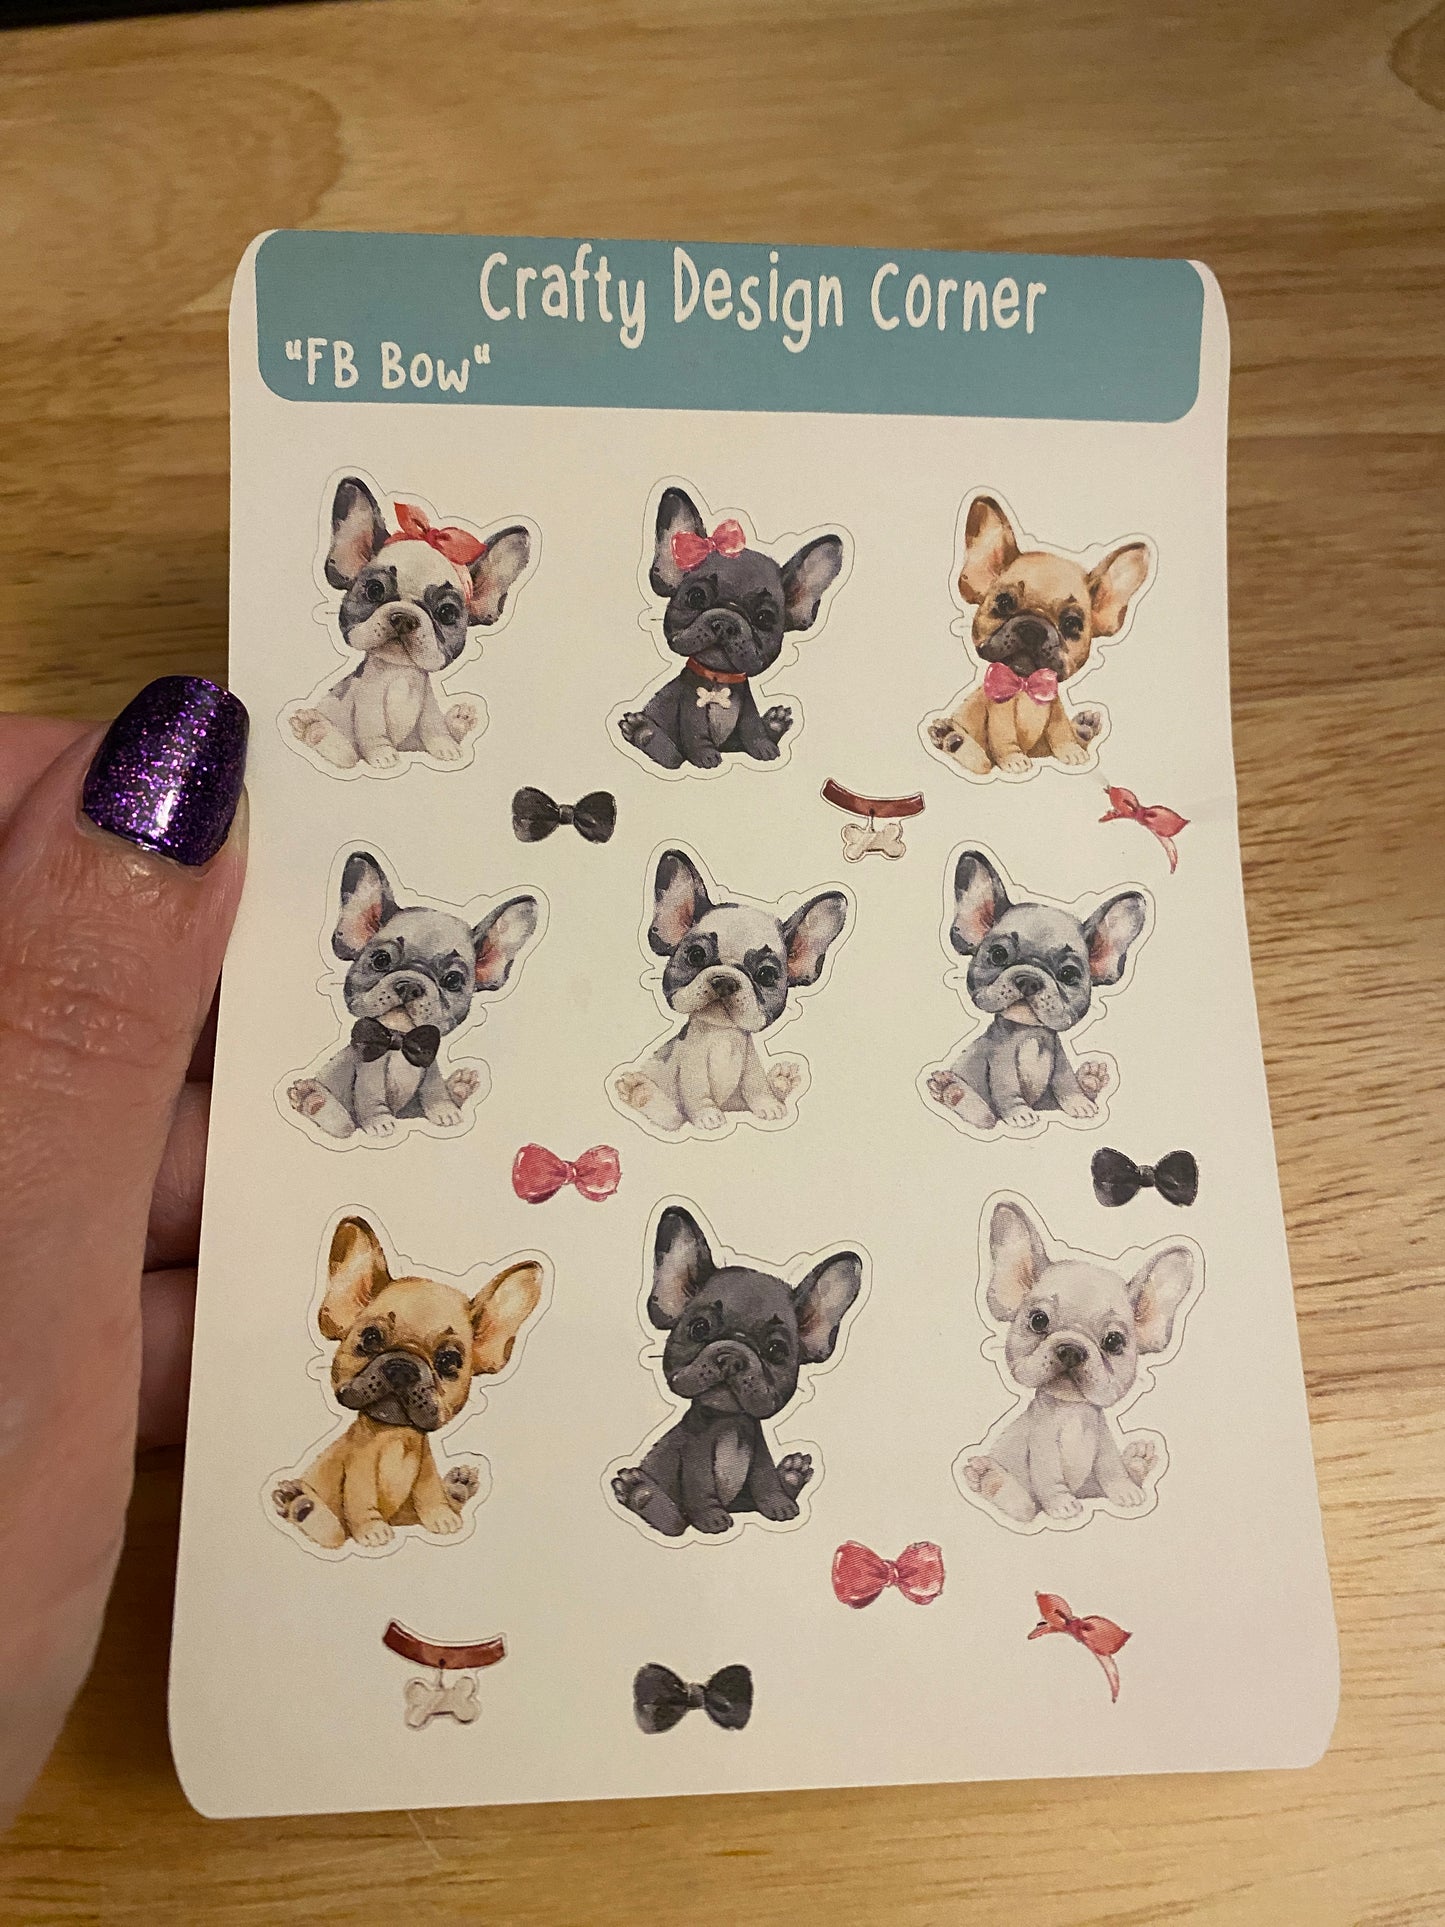 1.1" French Bulldog with decorations STICKERS